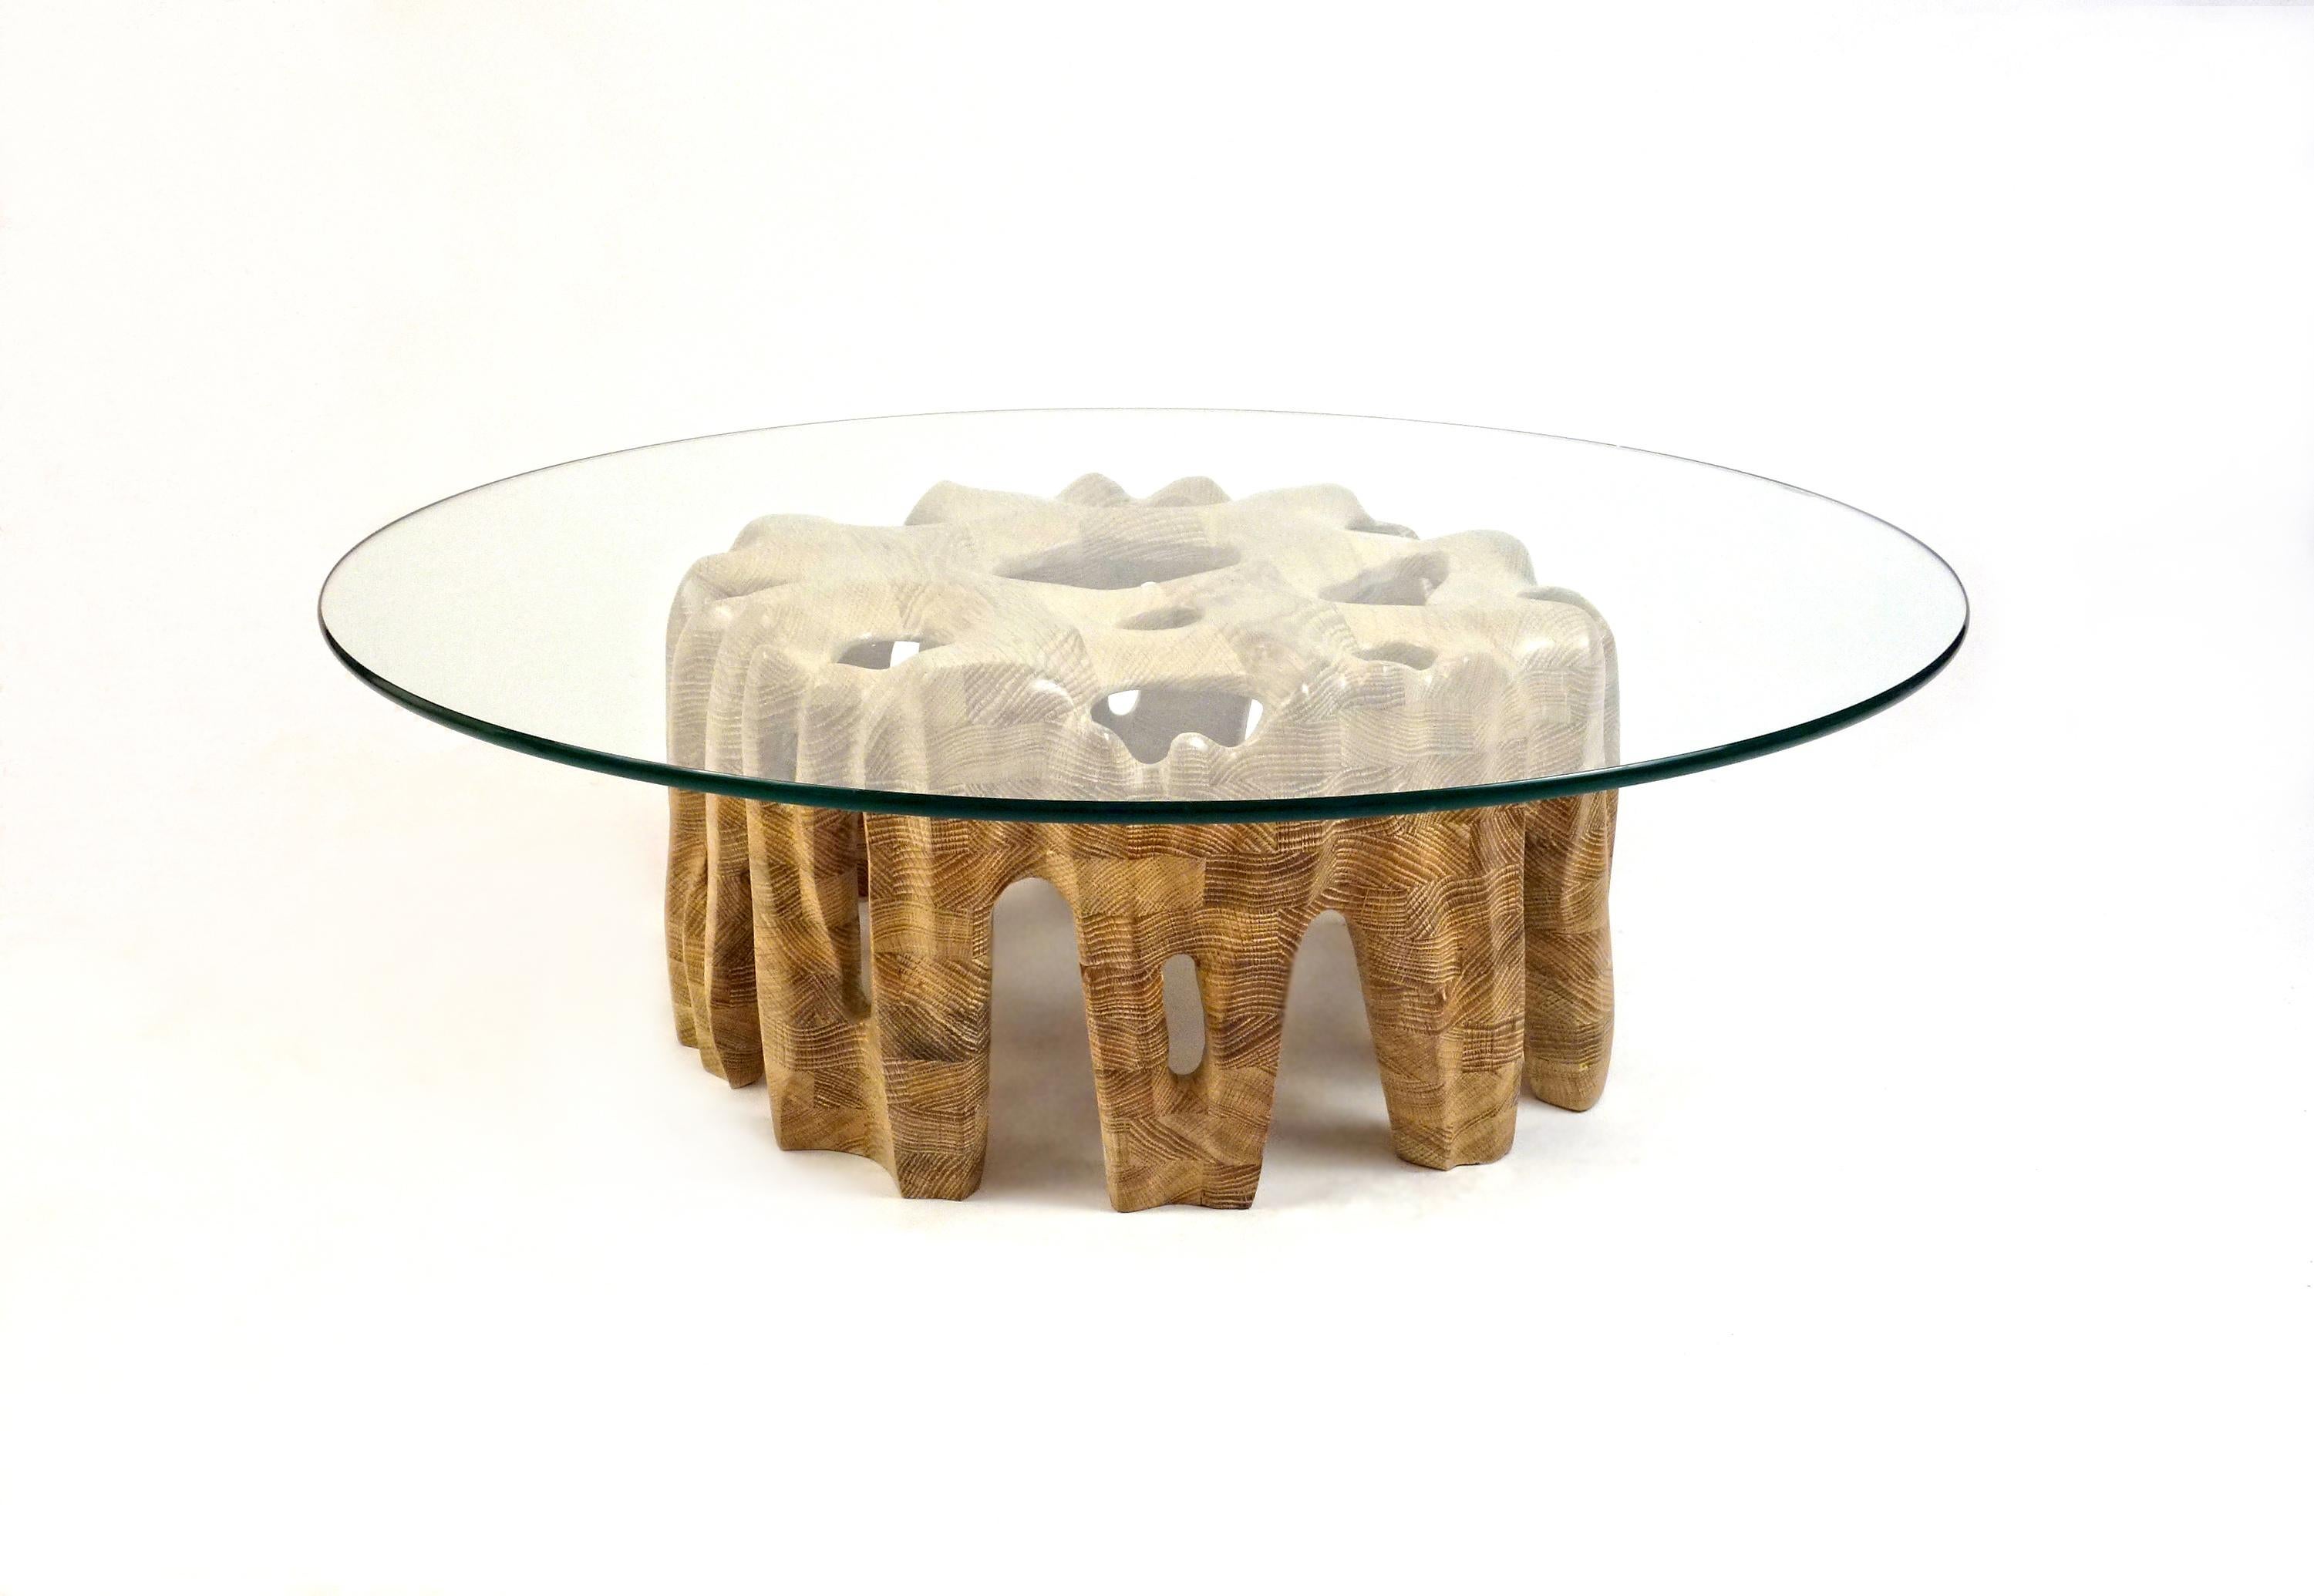 Erode Coffee Table by Aaron Scott
Dimensions: Ø 91.5 x H 30.5 cm
Materials: White oak and glass.

Hand-sculpted, solid wood coffee table with glass top, whose wood base simulates the eroded sides of a mountain. 

For all pieces in this series,